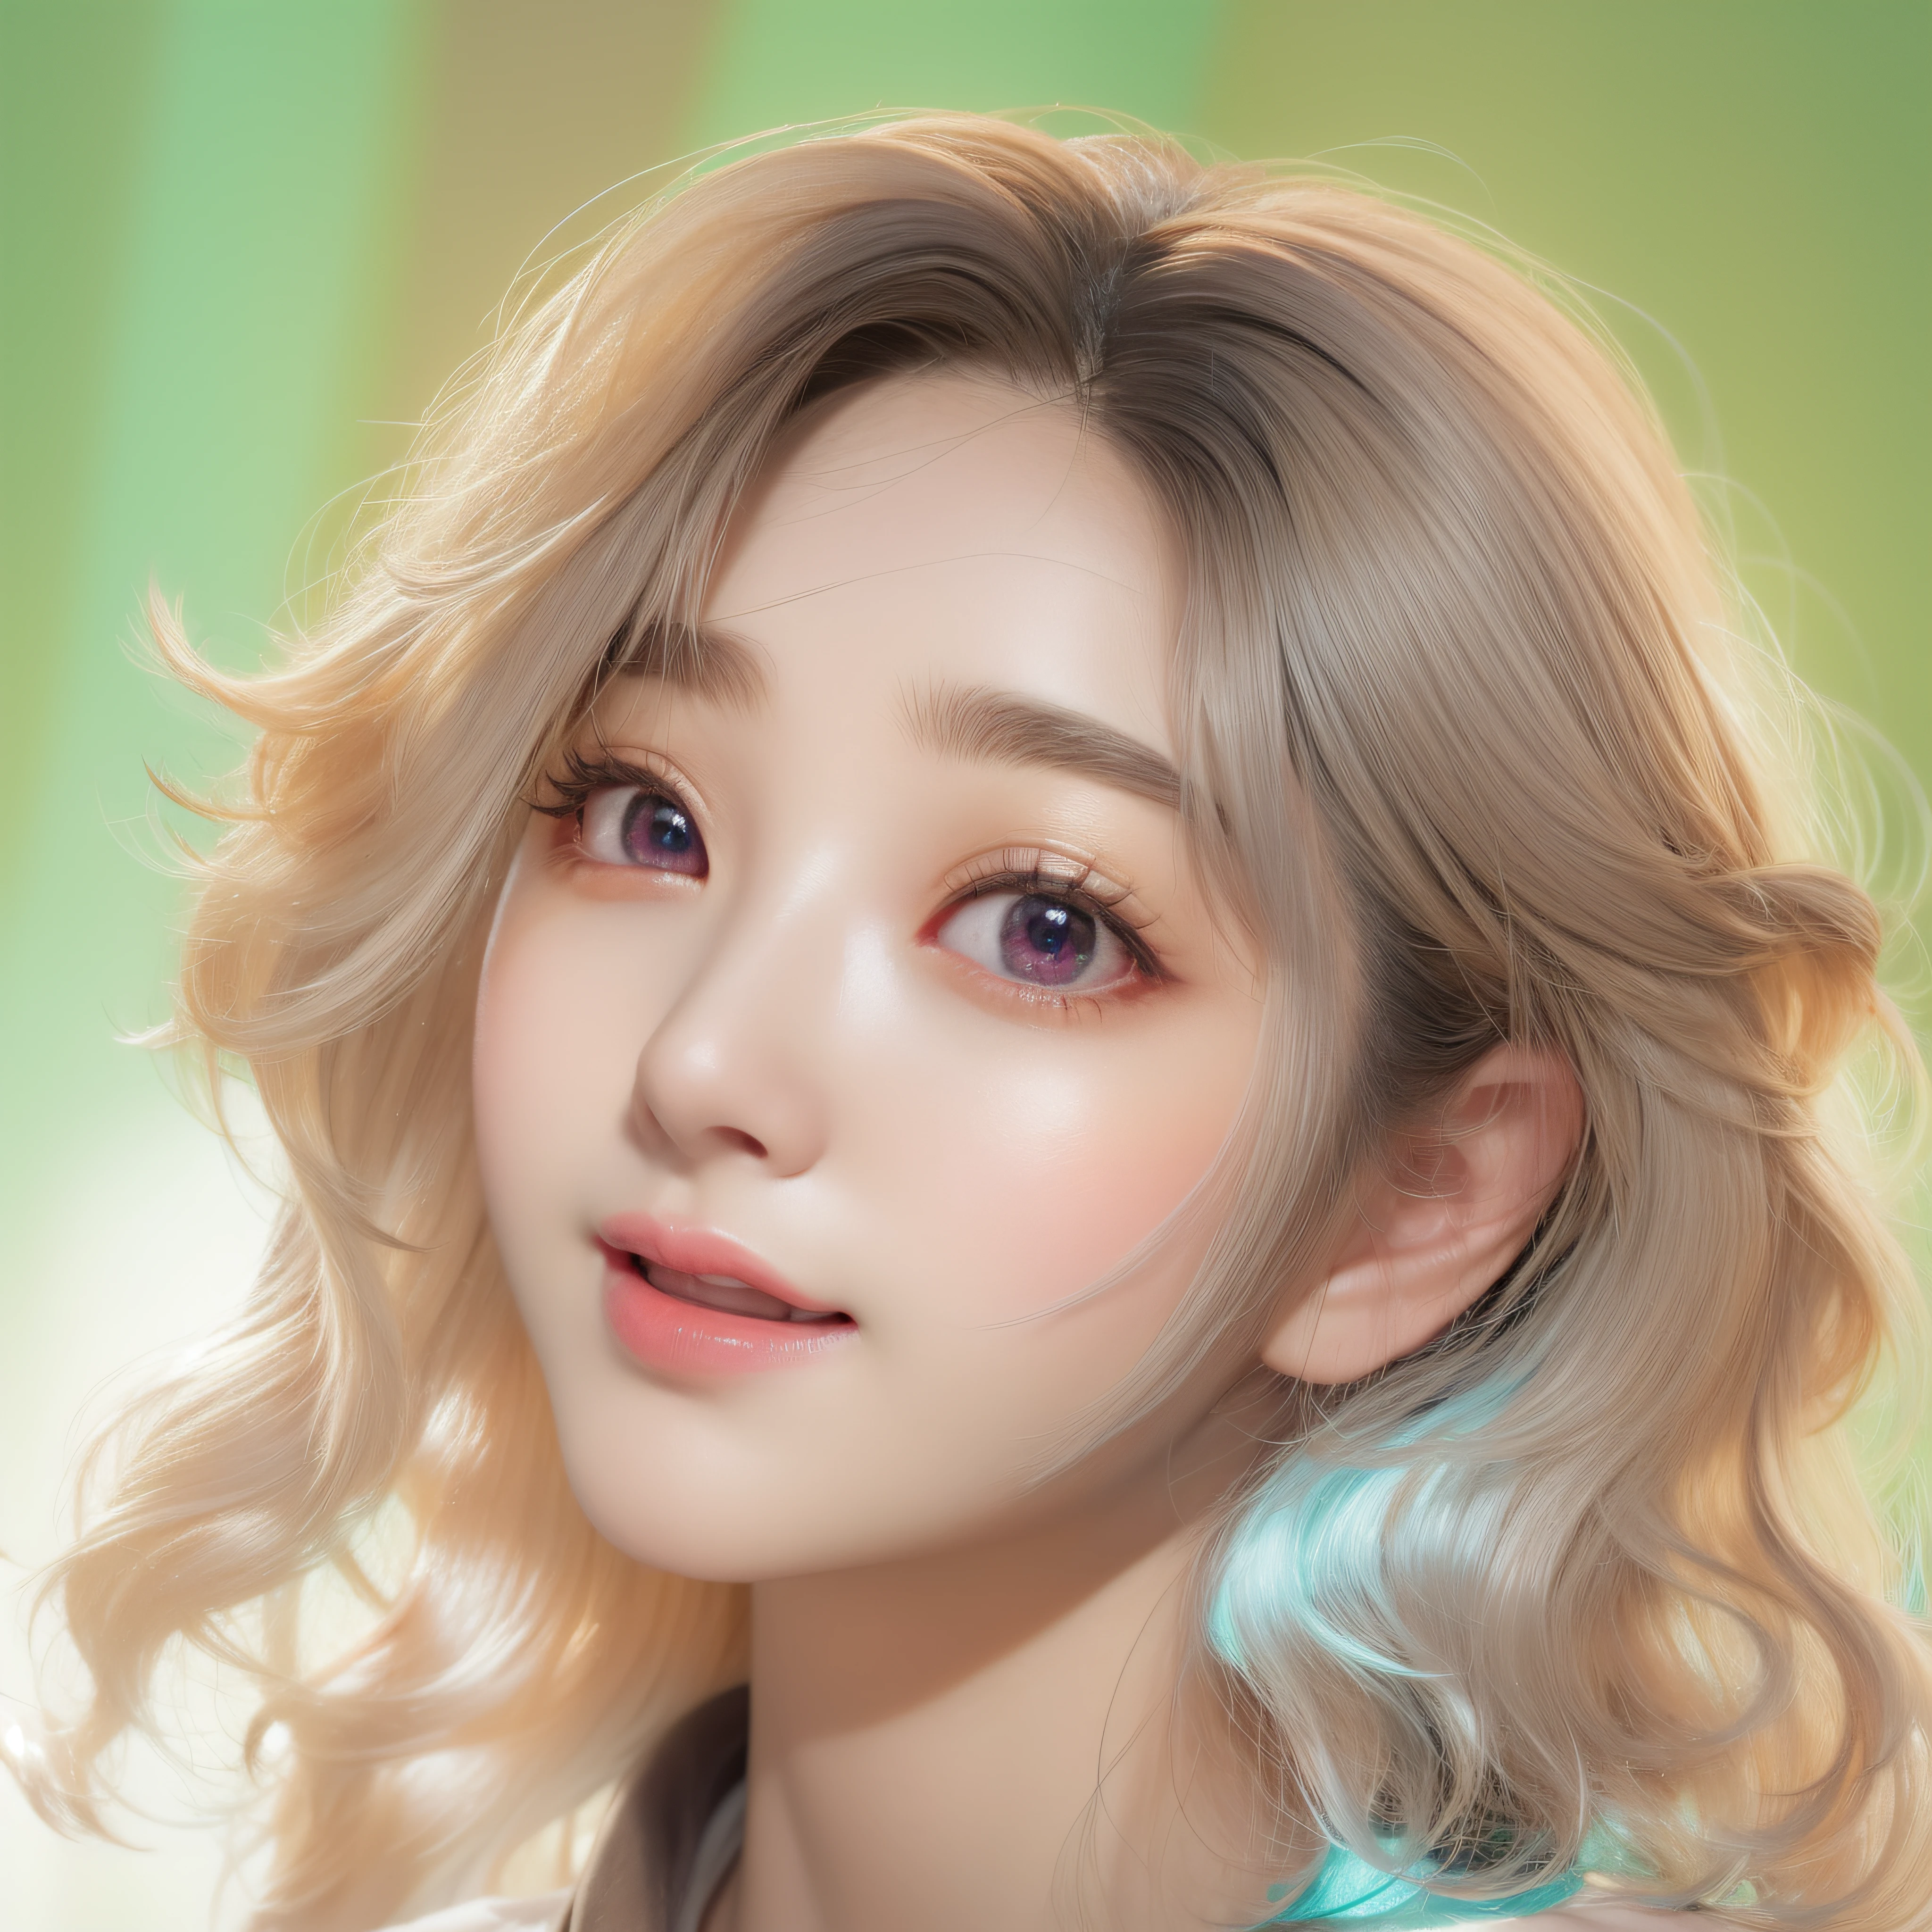 close-up of the smile face、close-up of the smile face、Designer、(realisitic、hight resolution)、(1 girl in)、Do-Up Eye、Korean Girl、(Best Quality), (masutepiece), (1girl in), Solo, a beauty girl, Perfect face, dreamlikeart、Highly detailed airbrush art((Surreal))、Volumetric lighting、(top-quality)、The ultra-detailliert、Highly detailed colorful details、(Bright lighting)、dynamic compositions、Ray traching、The mirror reflects light、Shallow depth of field、ultra-detailliert、mixing  exposure、nffsw、Her eyes are glowing pink、Eyes are pink。Tank Tops